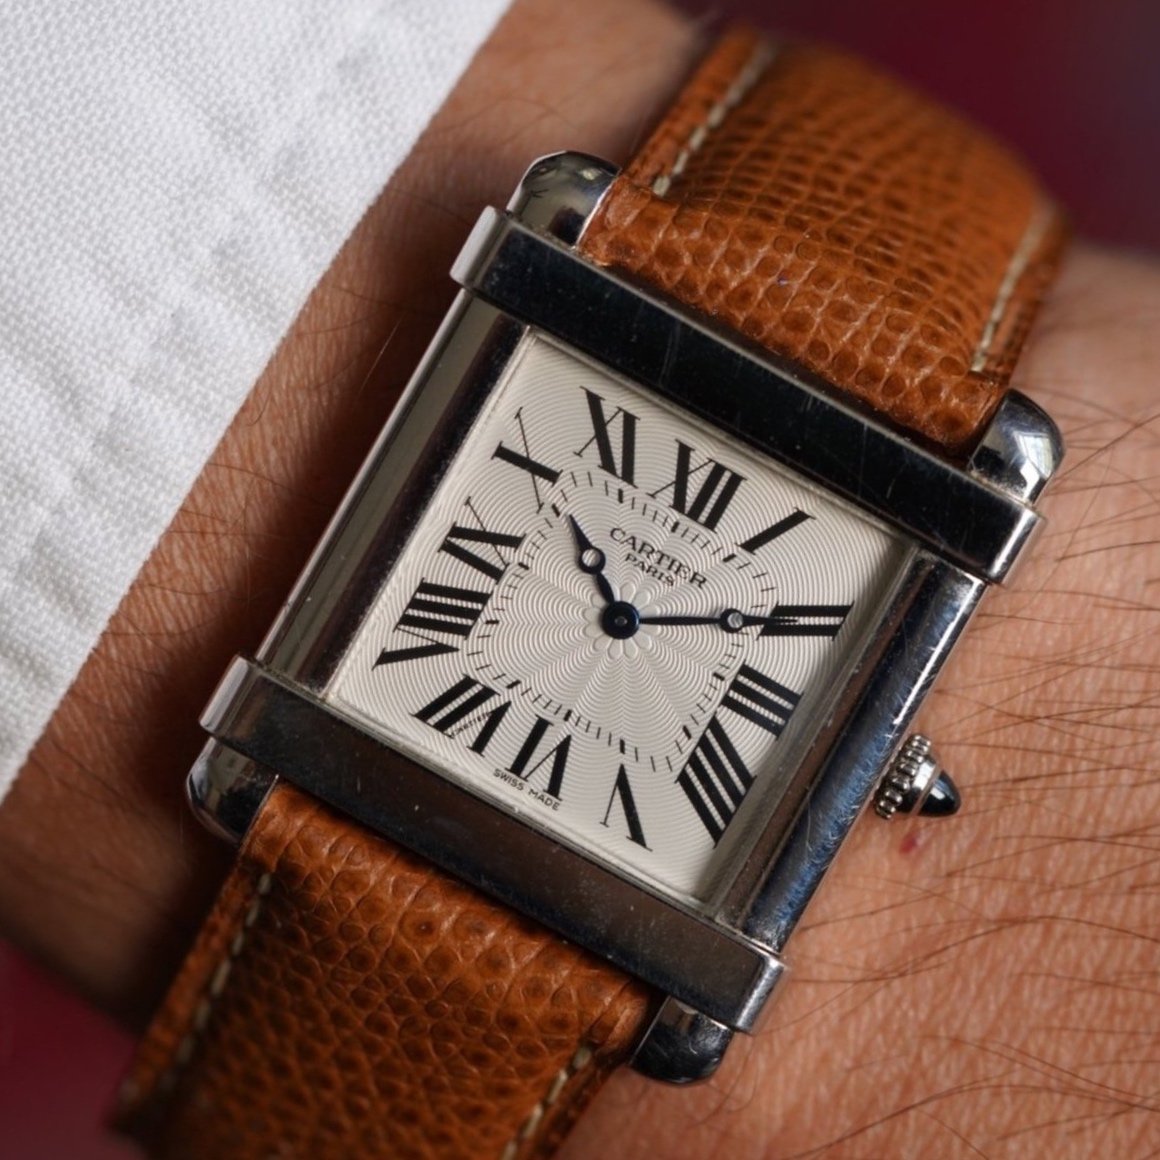 Cartier Tank Chinoise Reference 2685G in Platinum Unpolished w/ Box